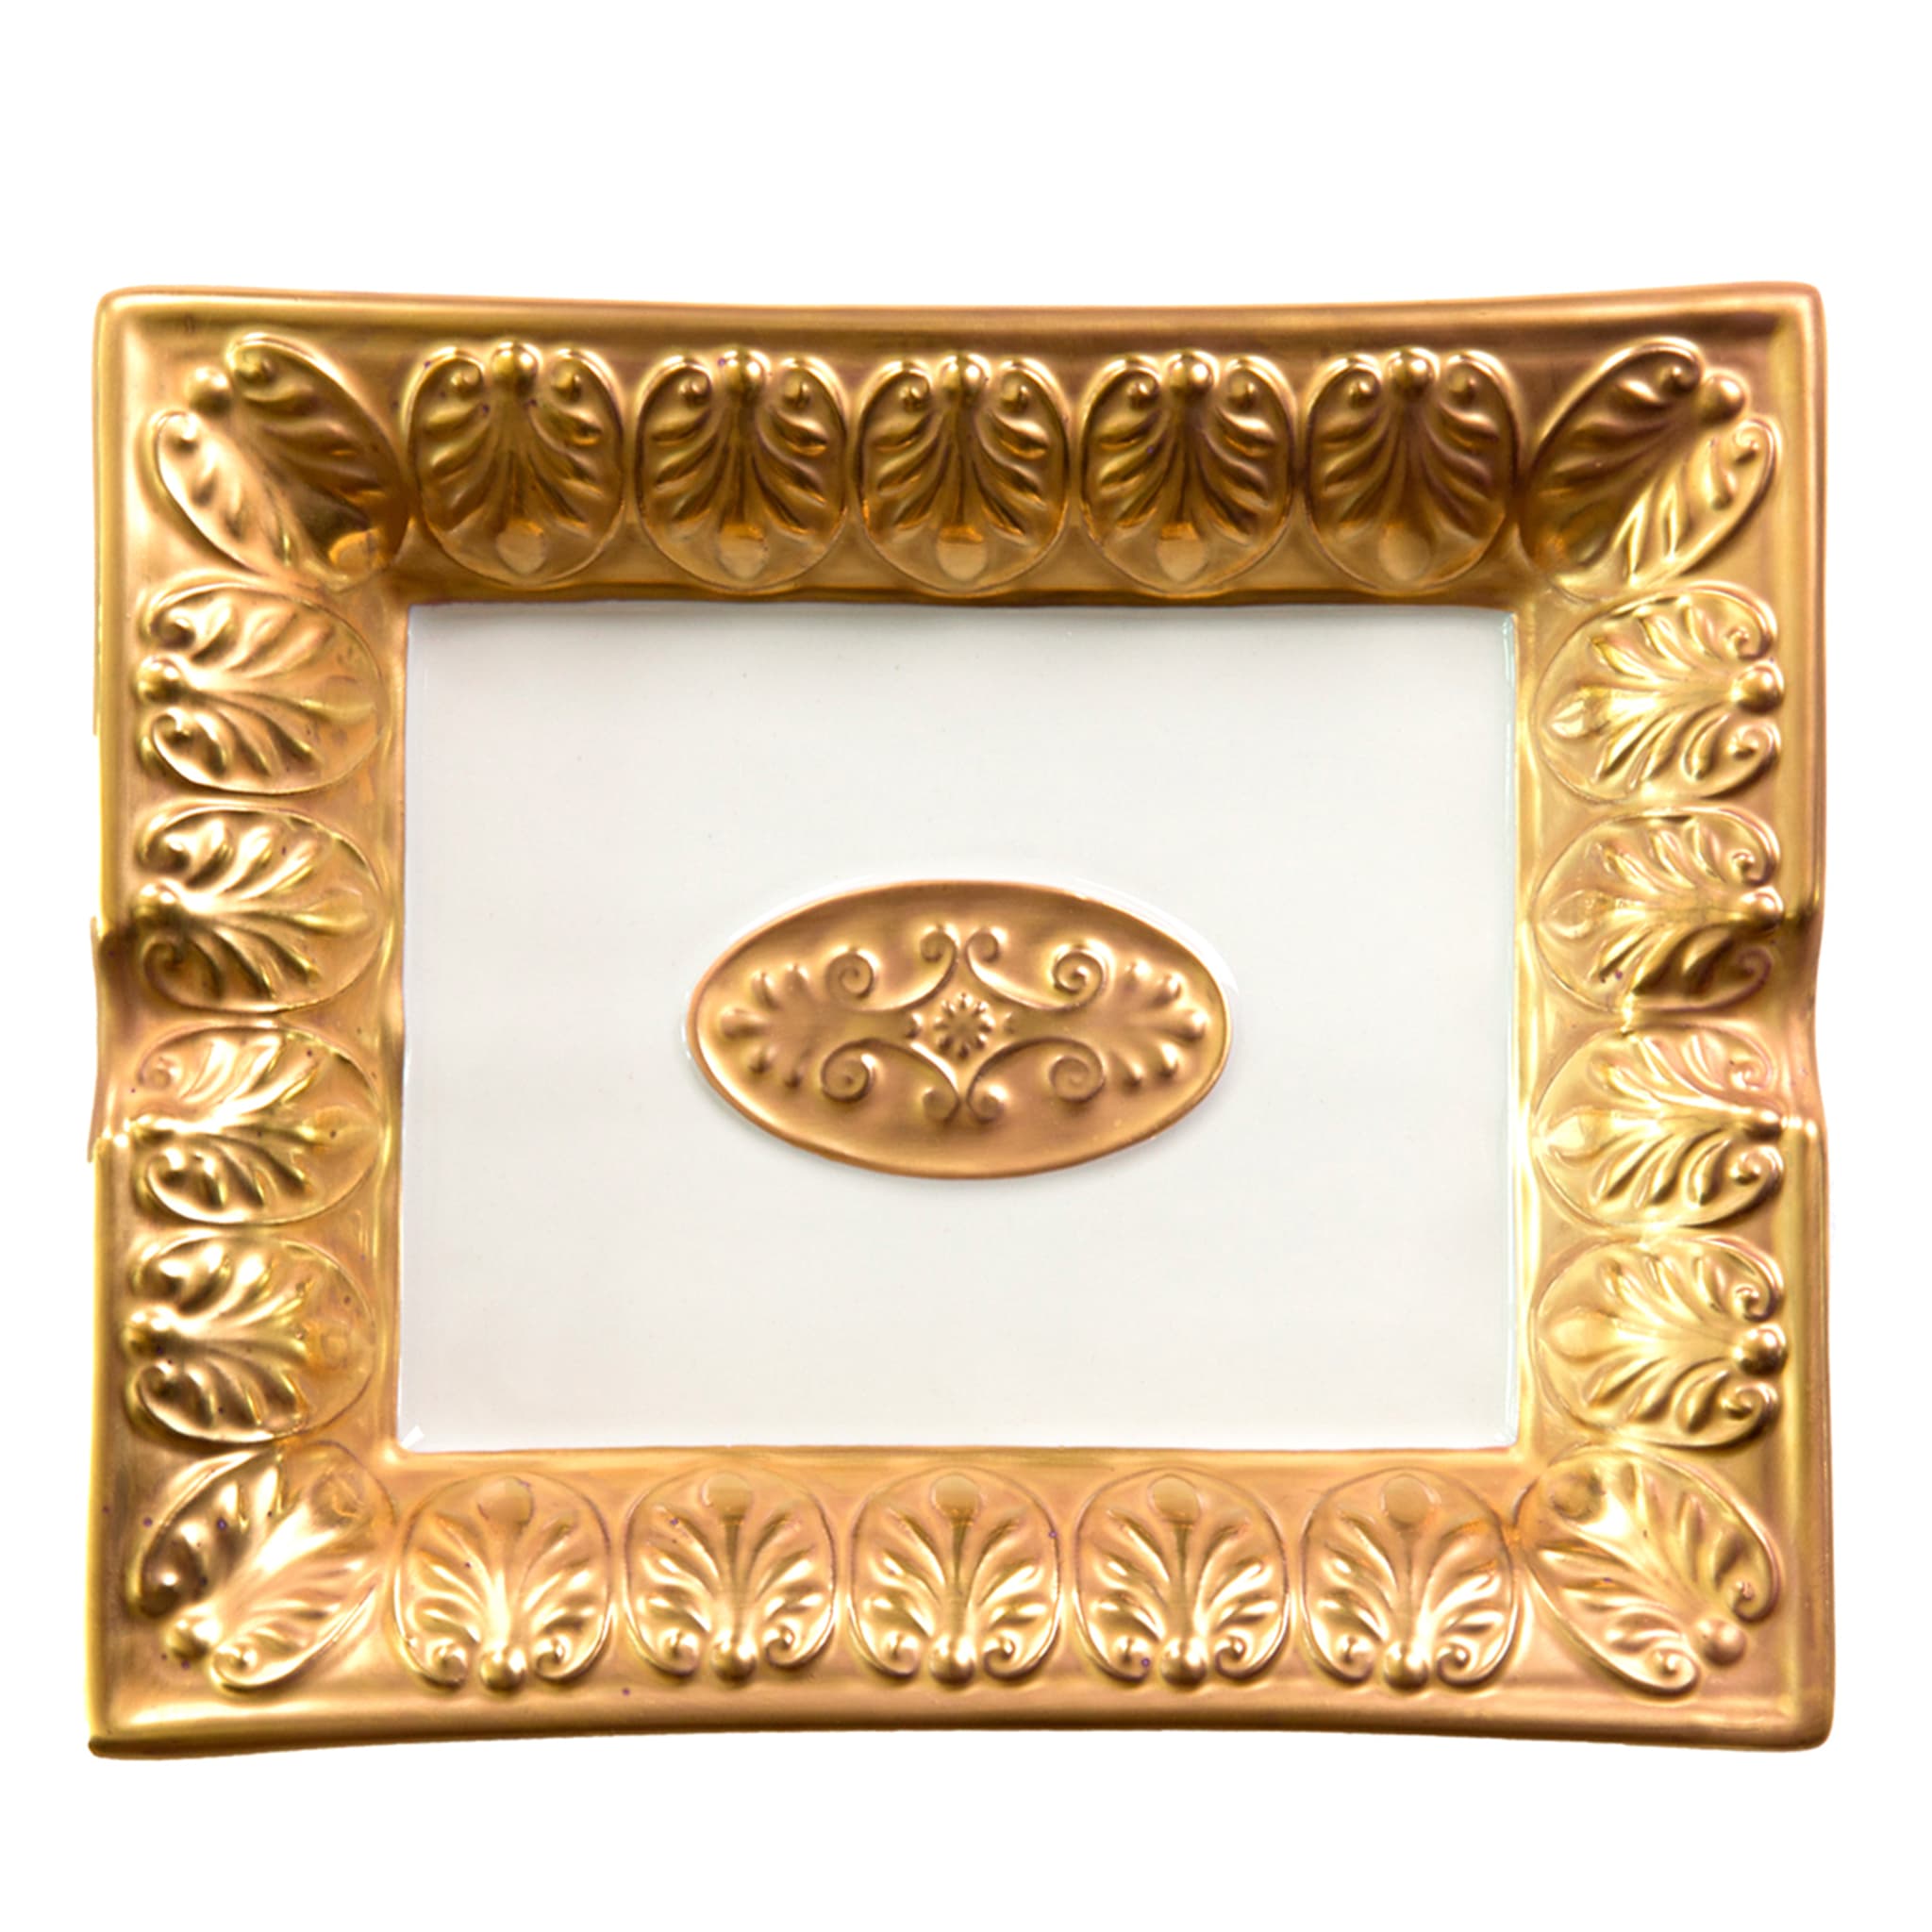 DECORATED ASHTRAY - GOLD - Main view